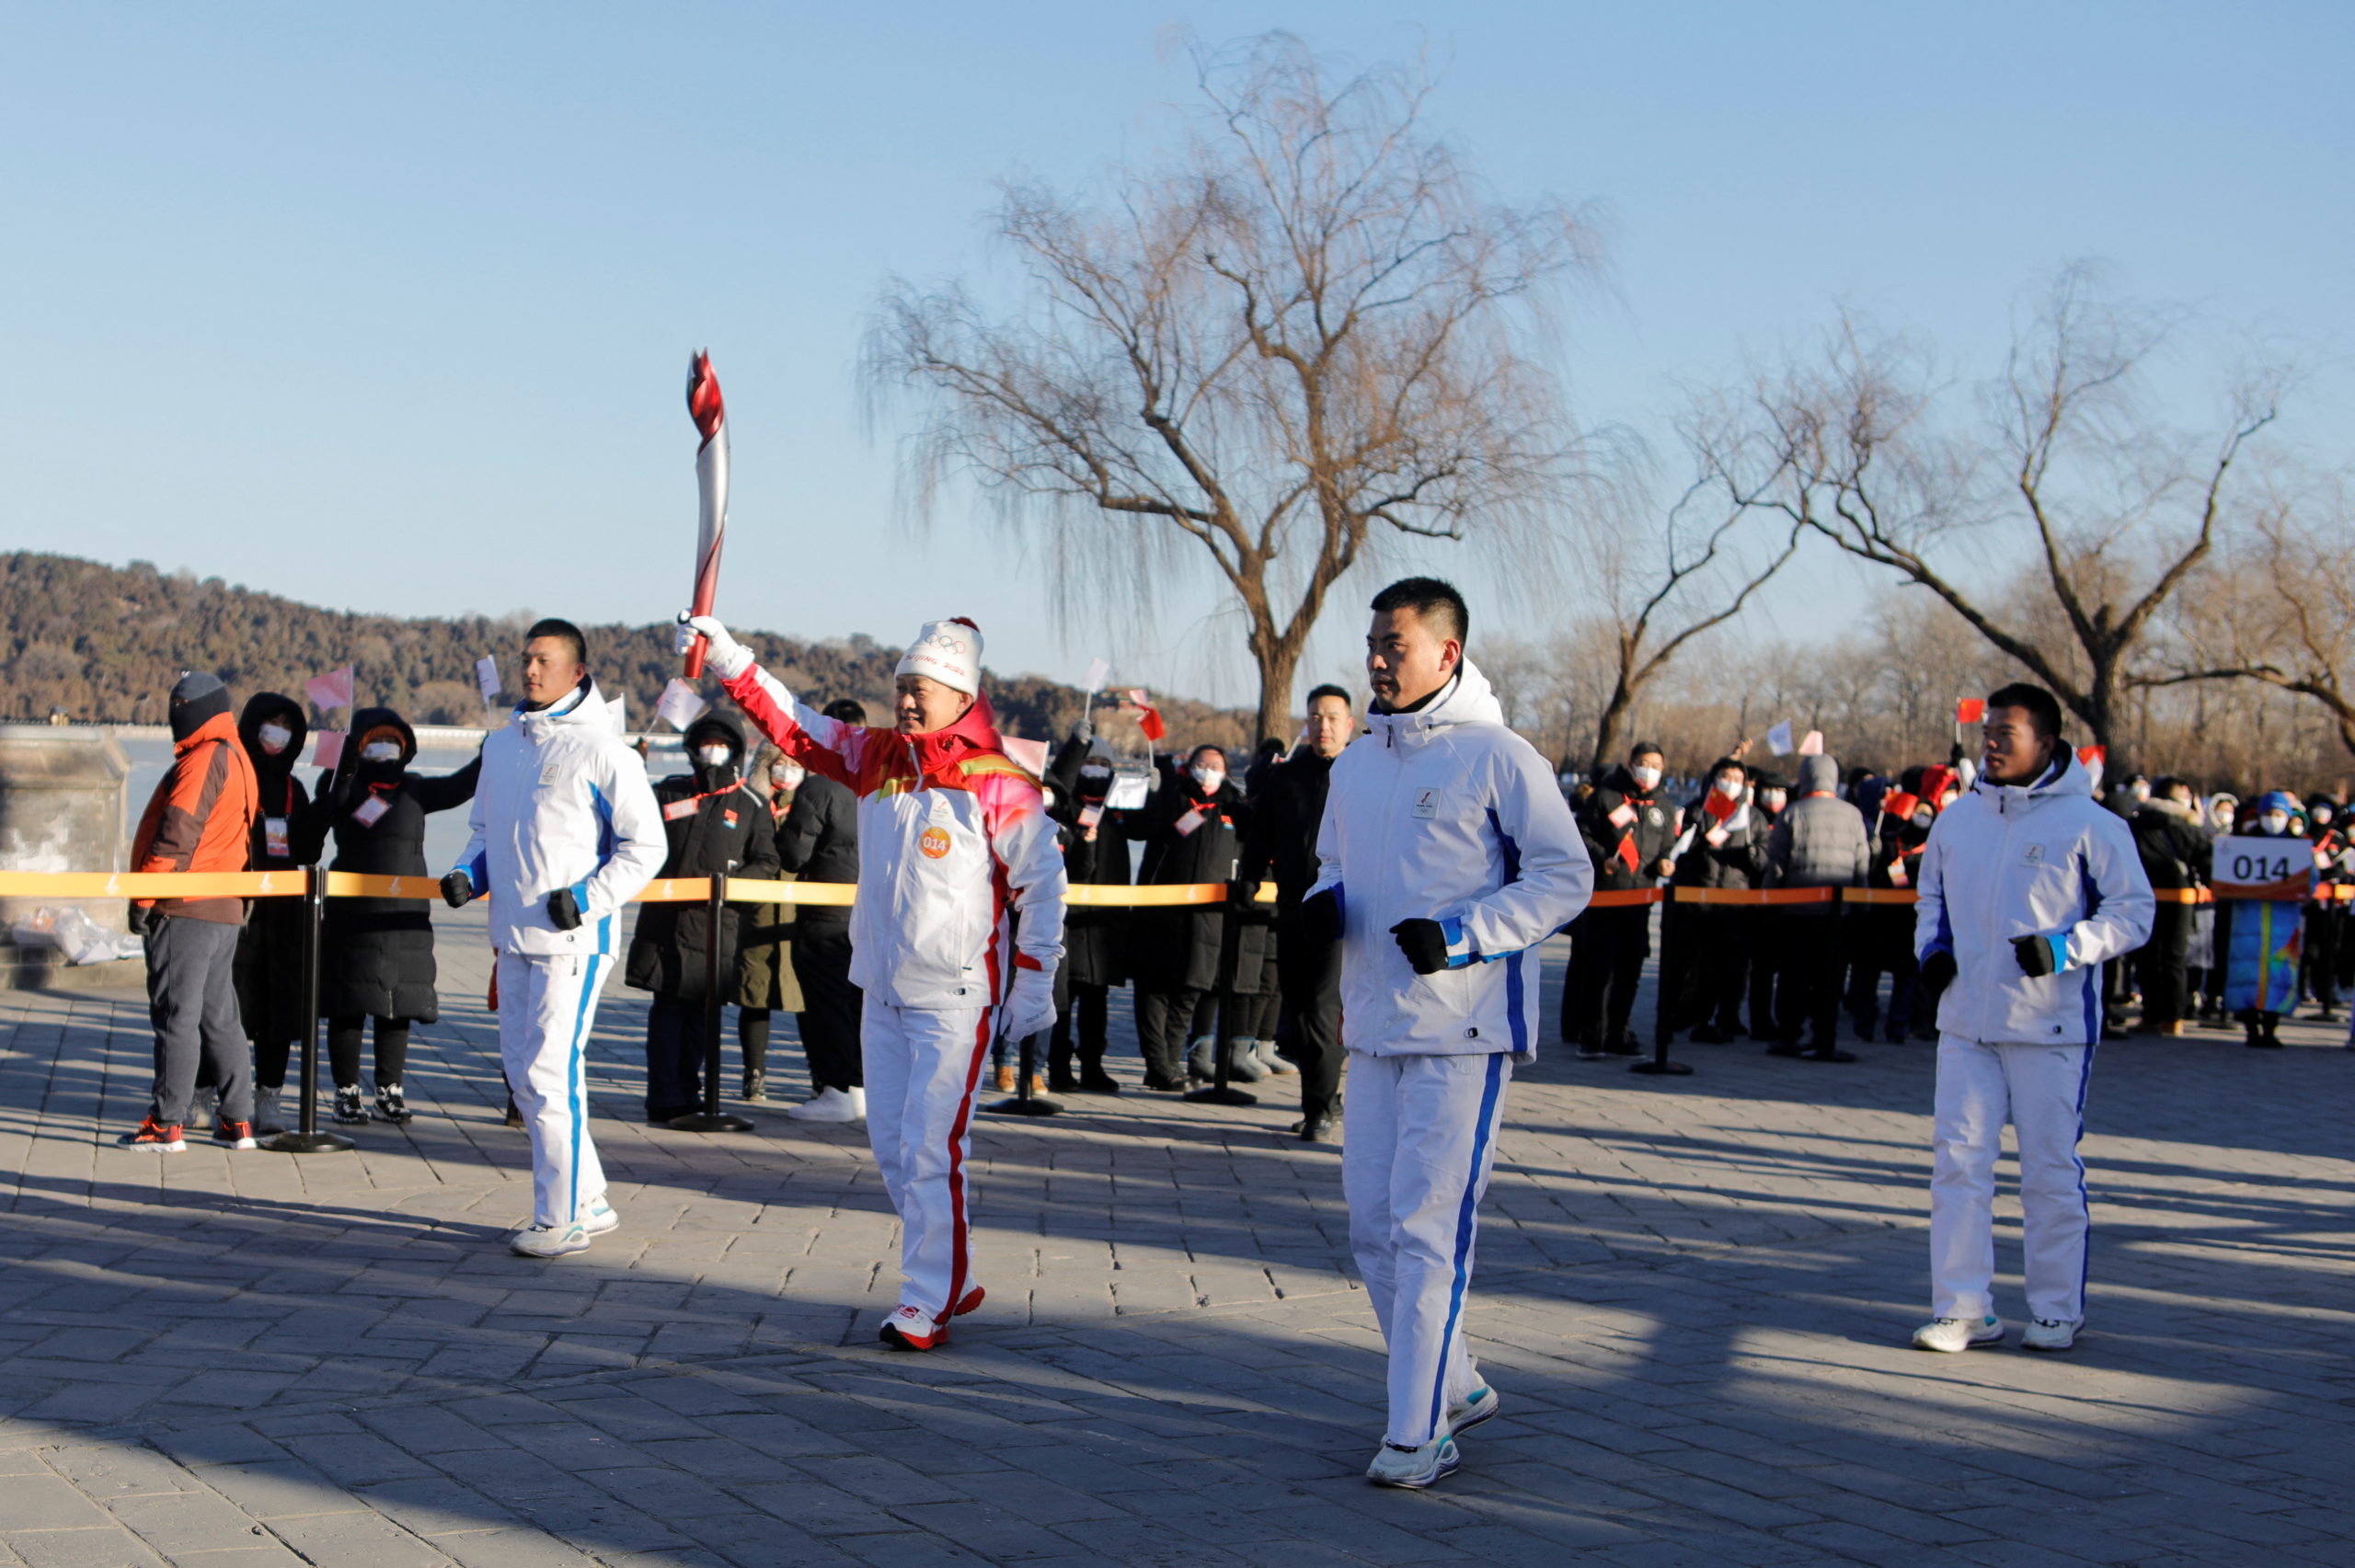 Olympics - Beijing 2022 Winter Olympics - Torch Relay - Beijing, China - February 4, 2022. Torch bearer Liu Qingquan carries the Olympic flame at the Summer Palace in Haidian district. 